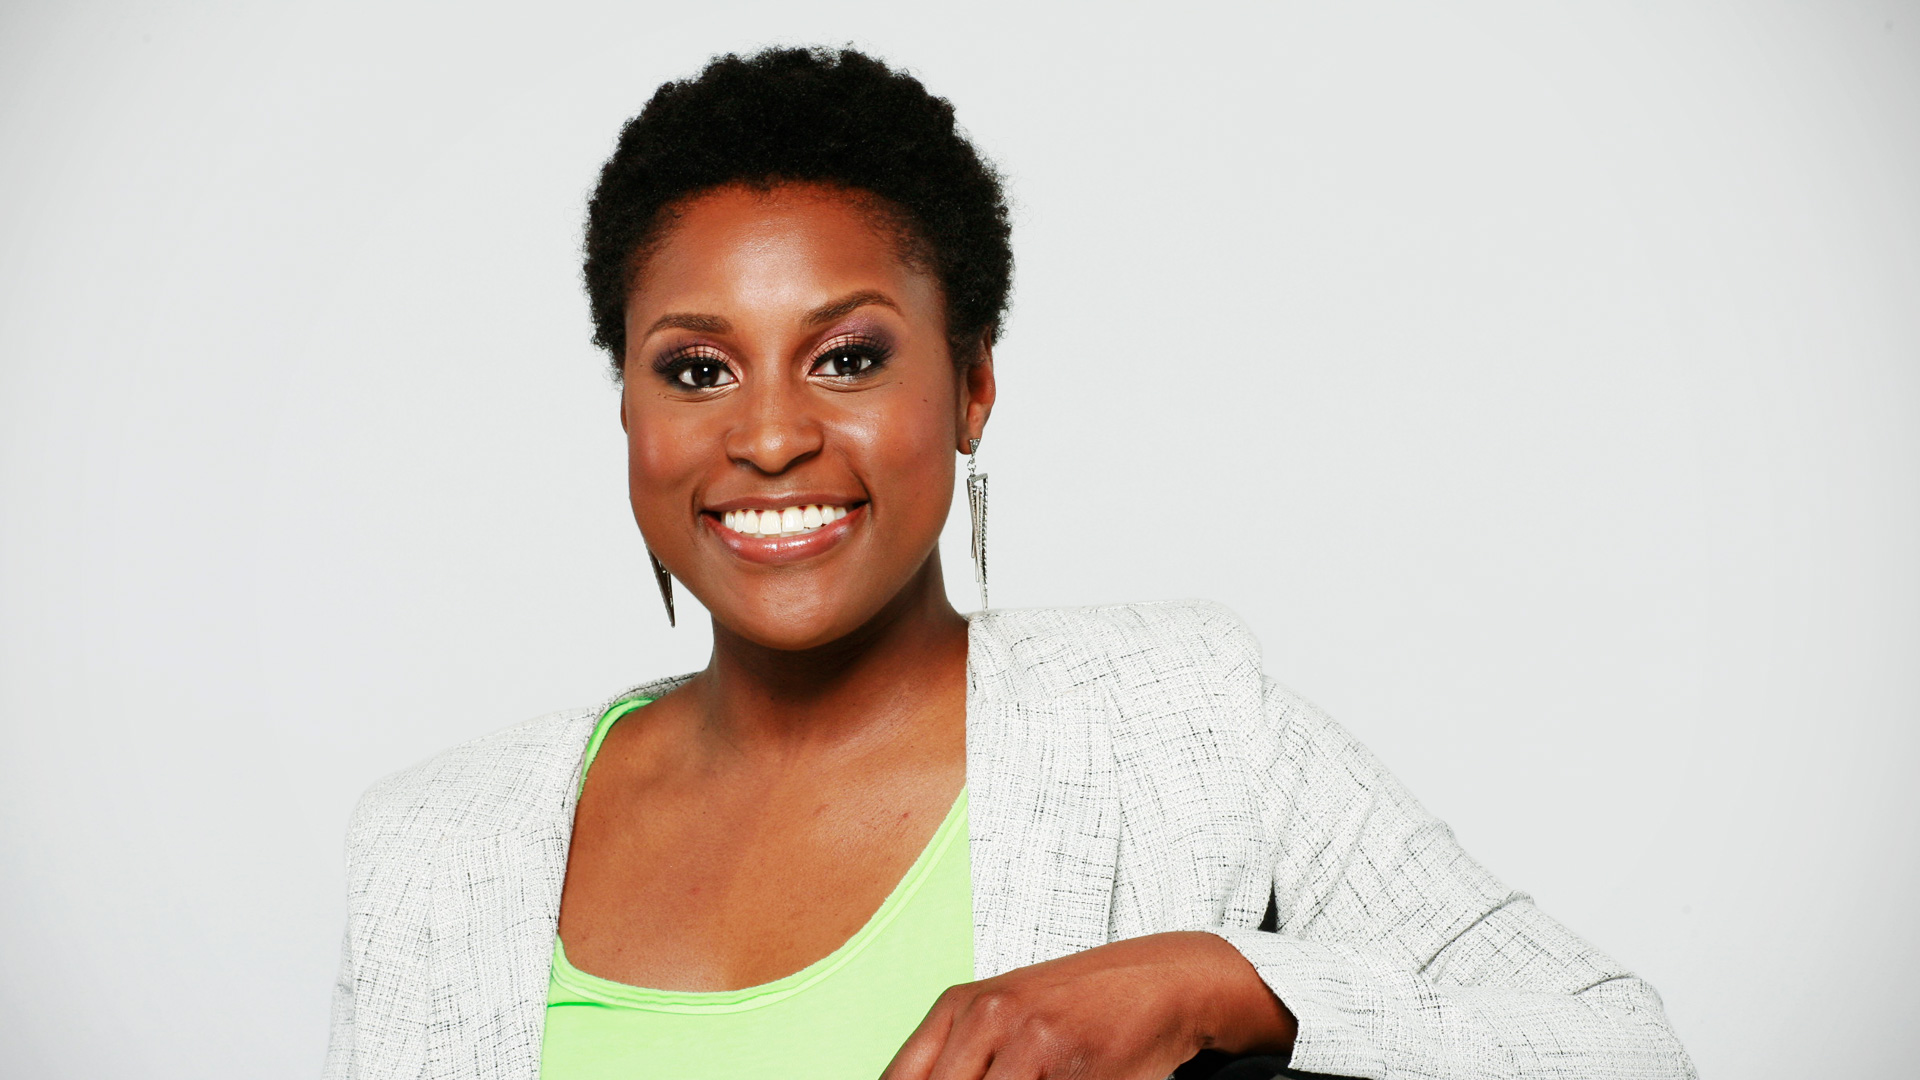 Insecure: How Issa Rae’s New Show Is Breaking Down Racism